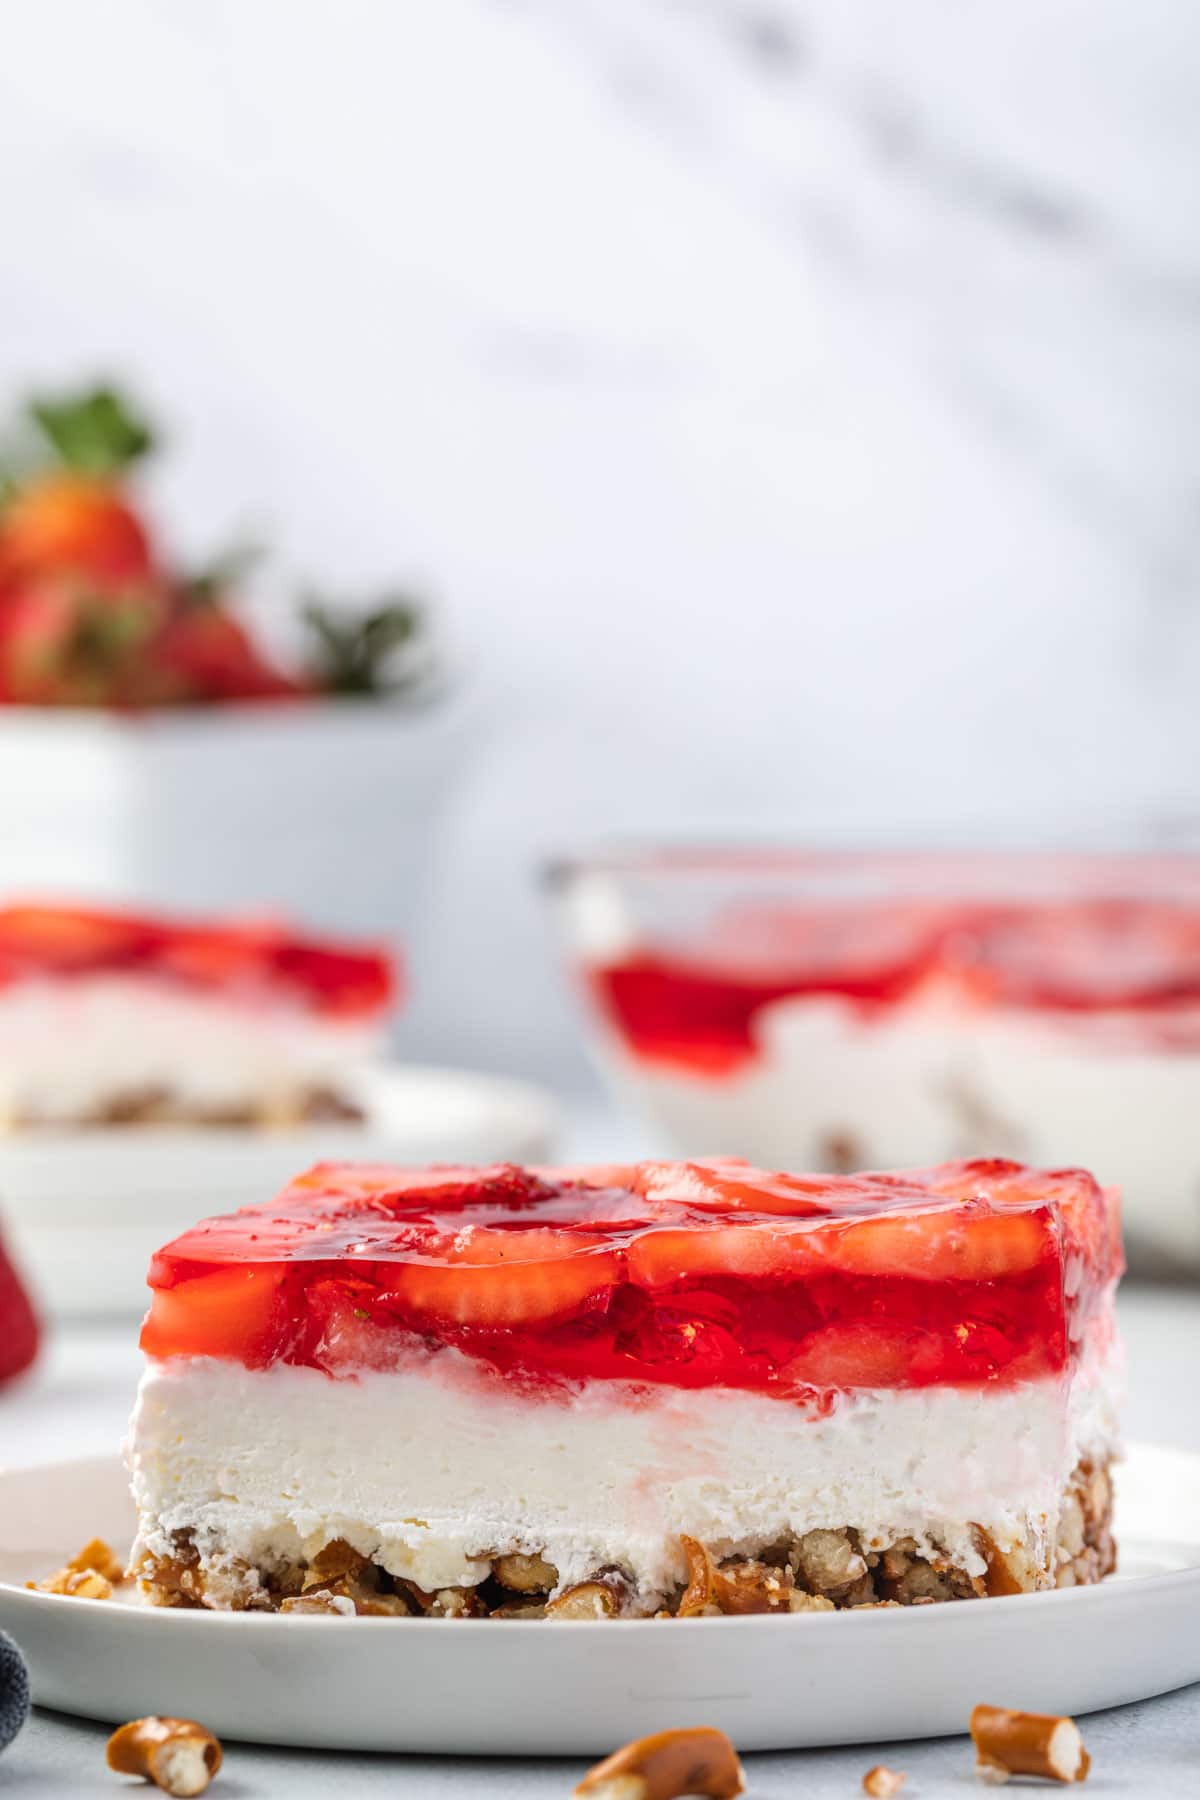 Piece of layered strawberry pretzel salad on a plate with the pan of jello salad and a basket of strawberries in the background.